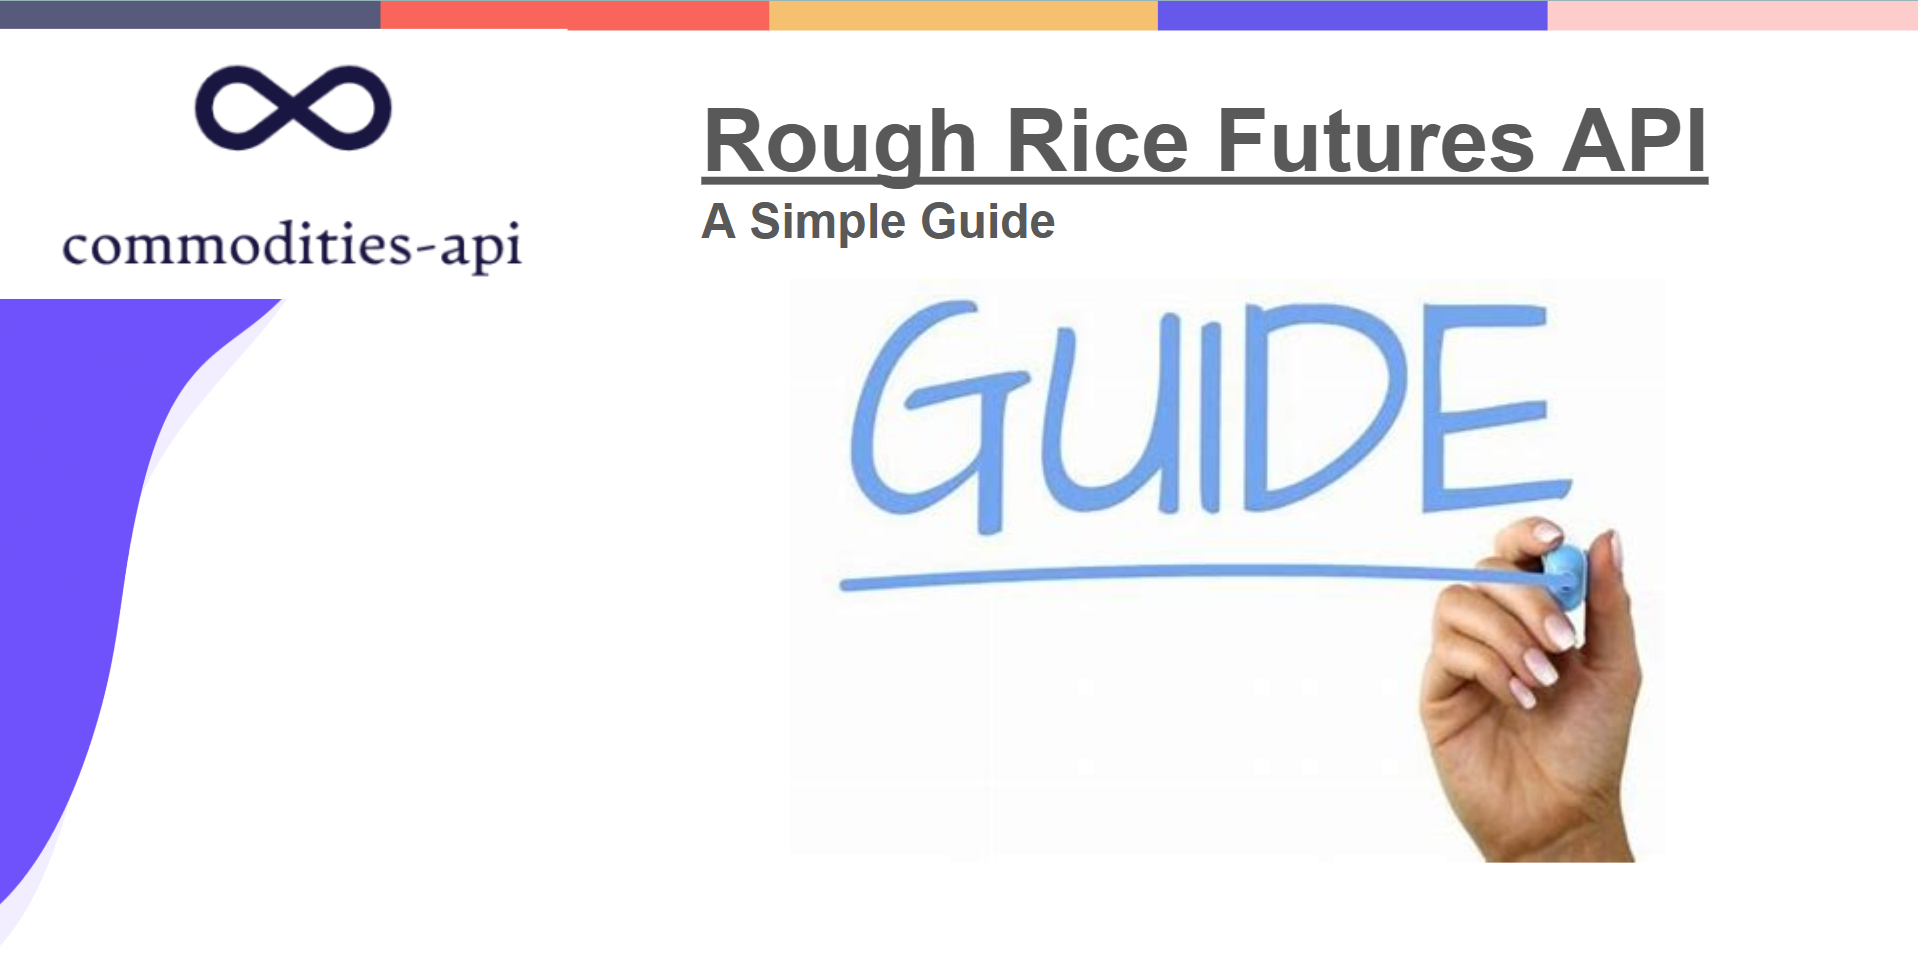 A Simple Guide To The Rough Rice Futures API